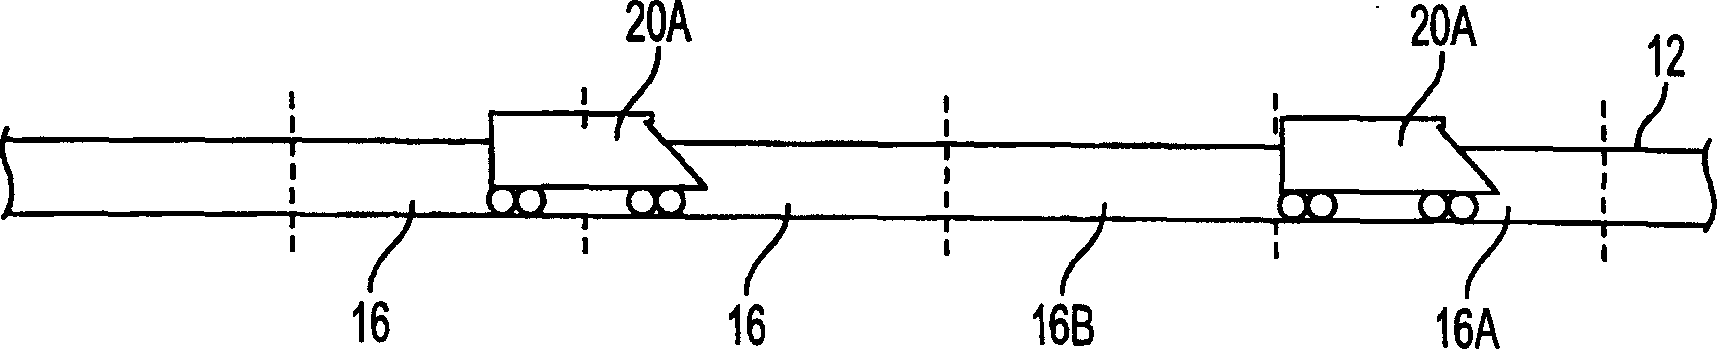 Rolling stock control system and method by device along route